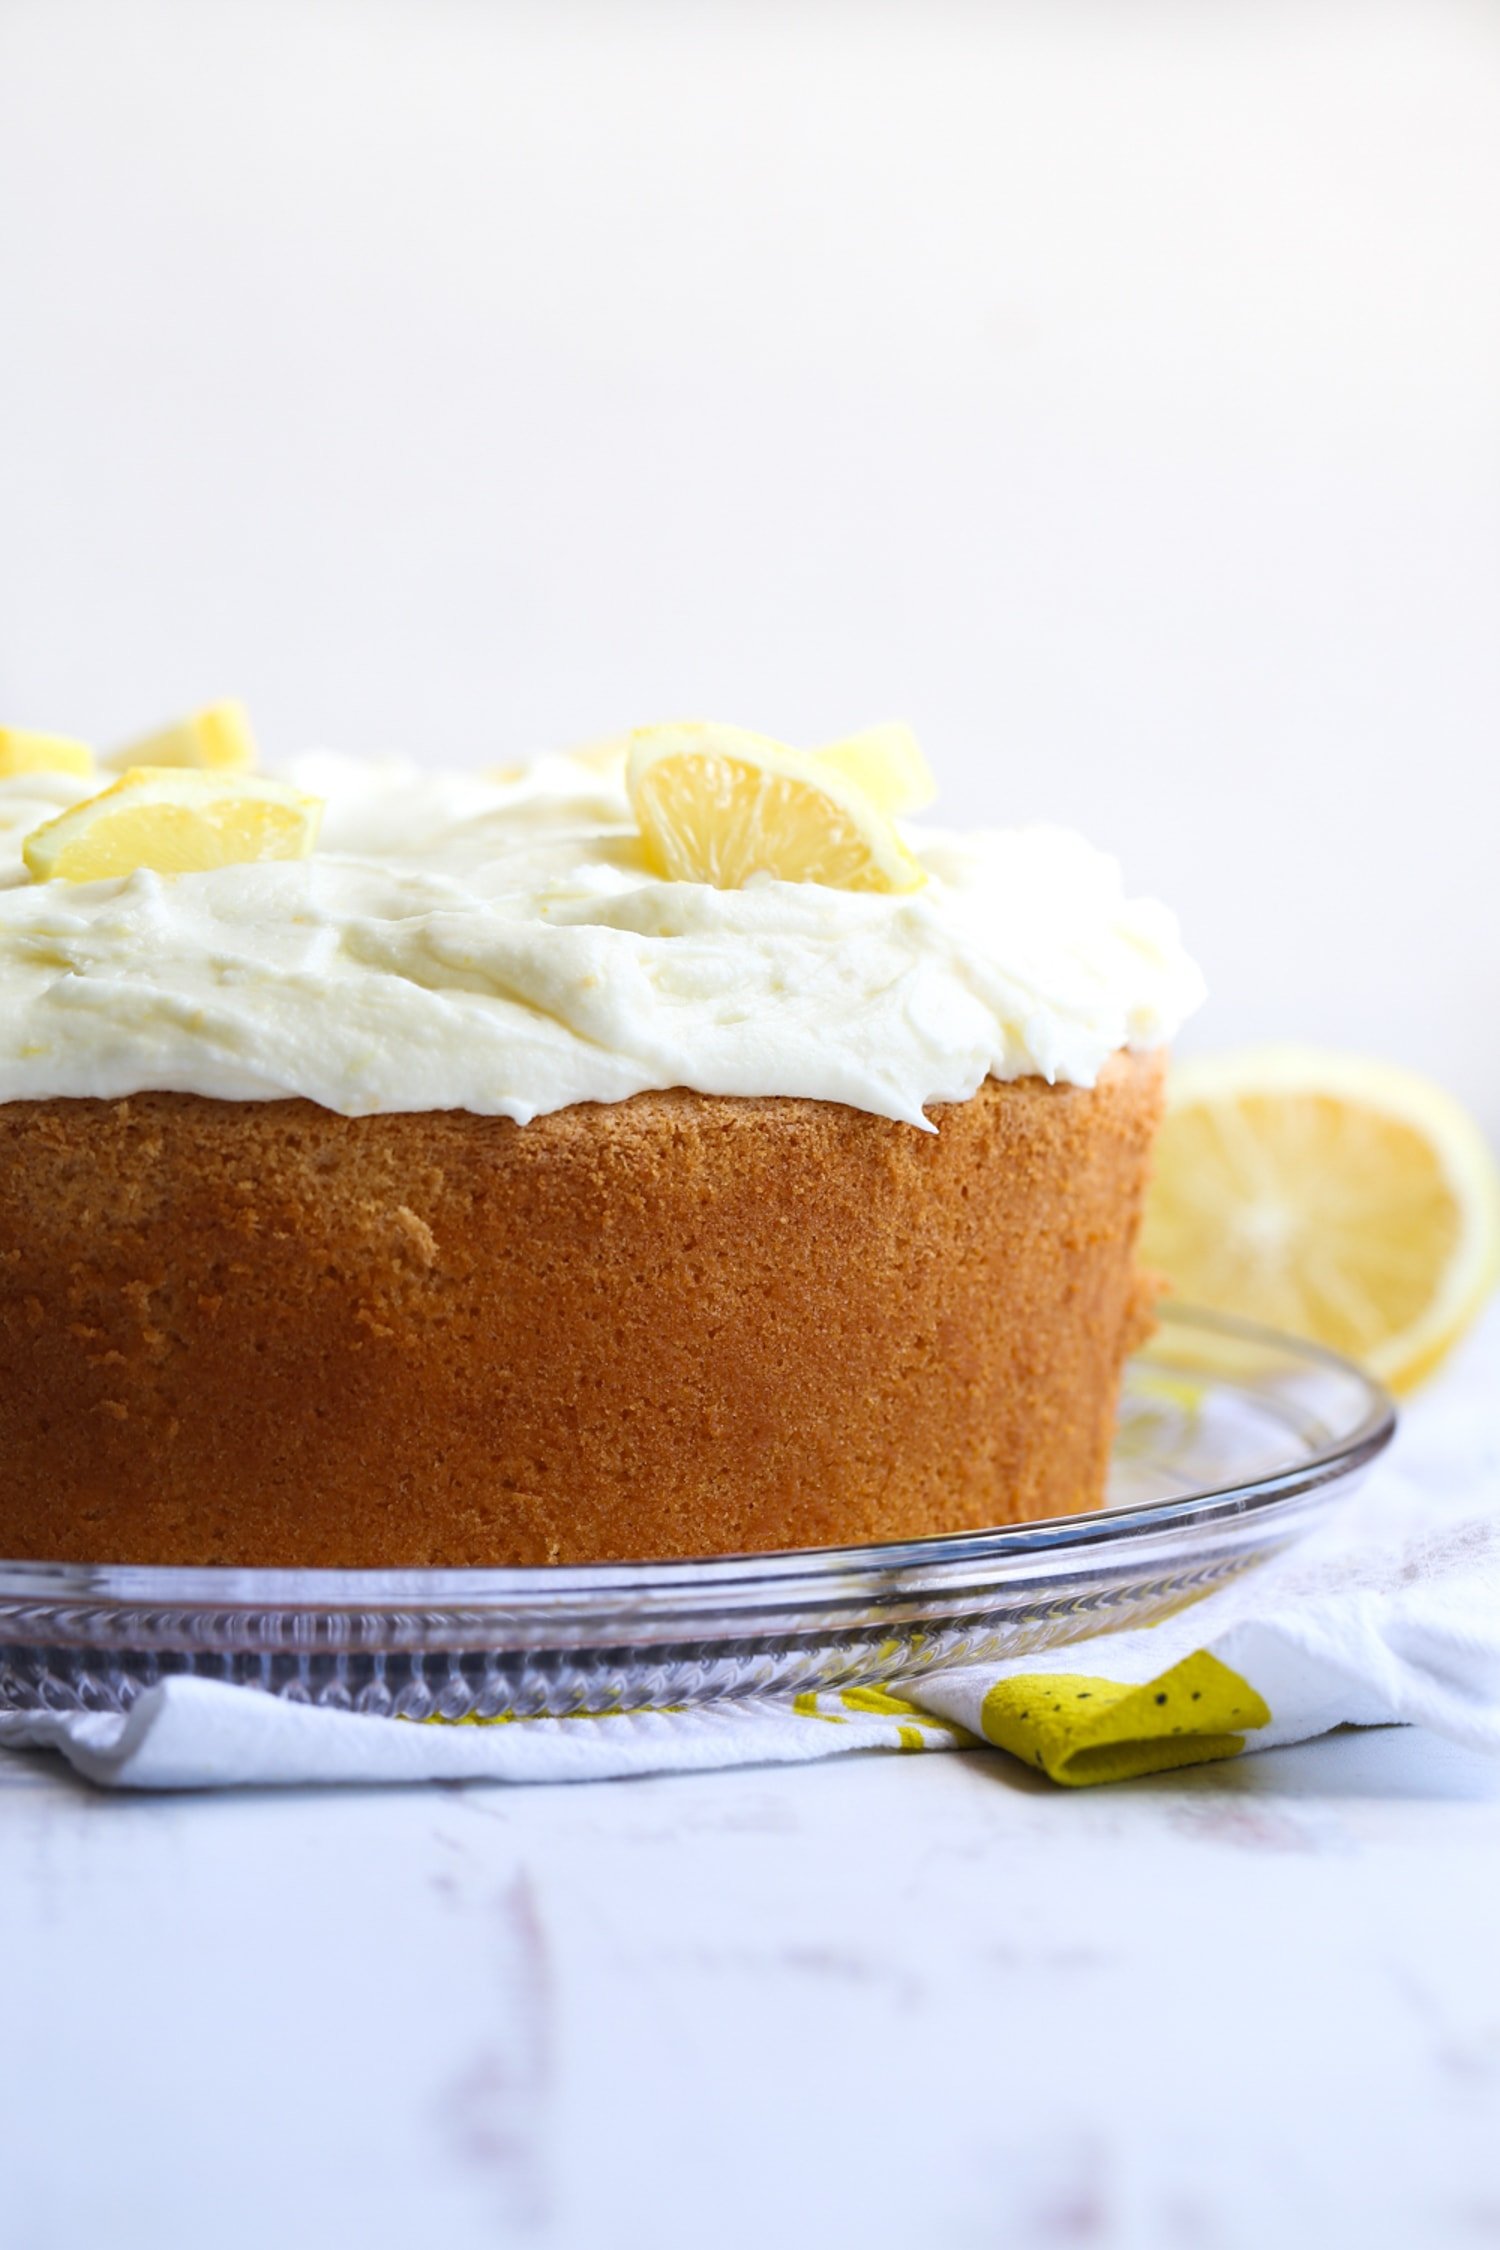 Lemon chiffon cake on a cake plate from the side with fluffy lemon frosting